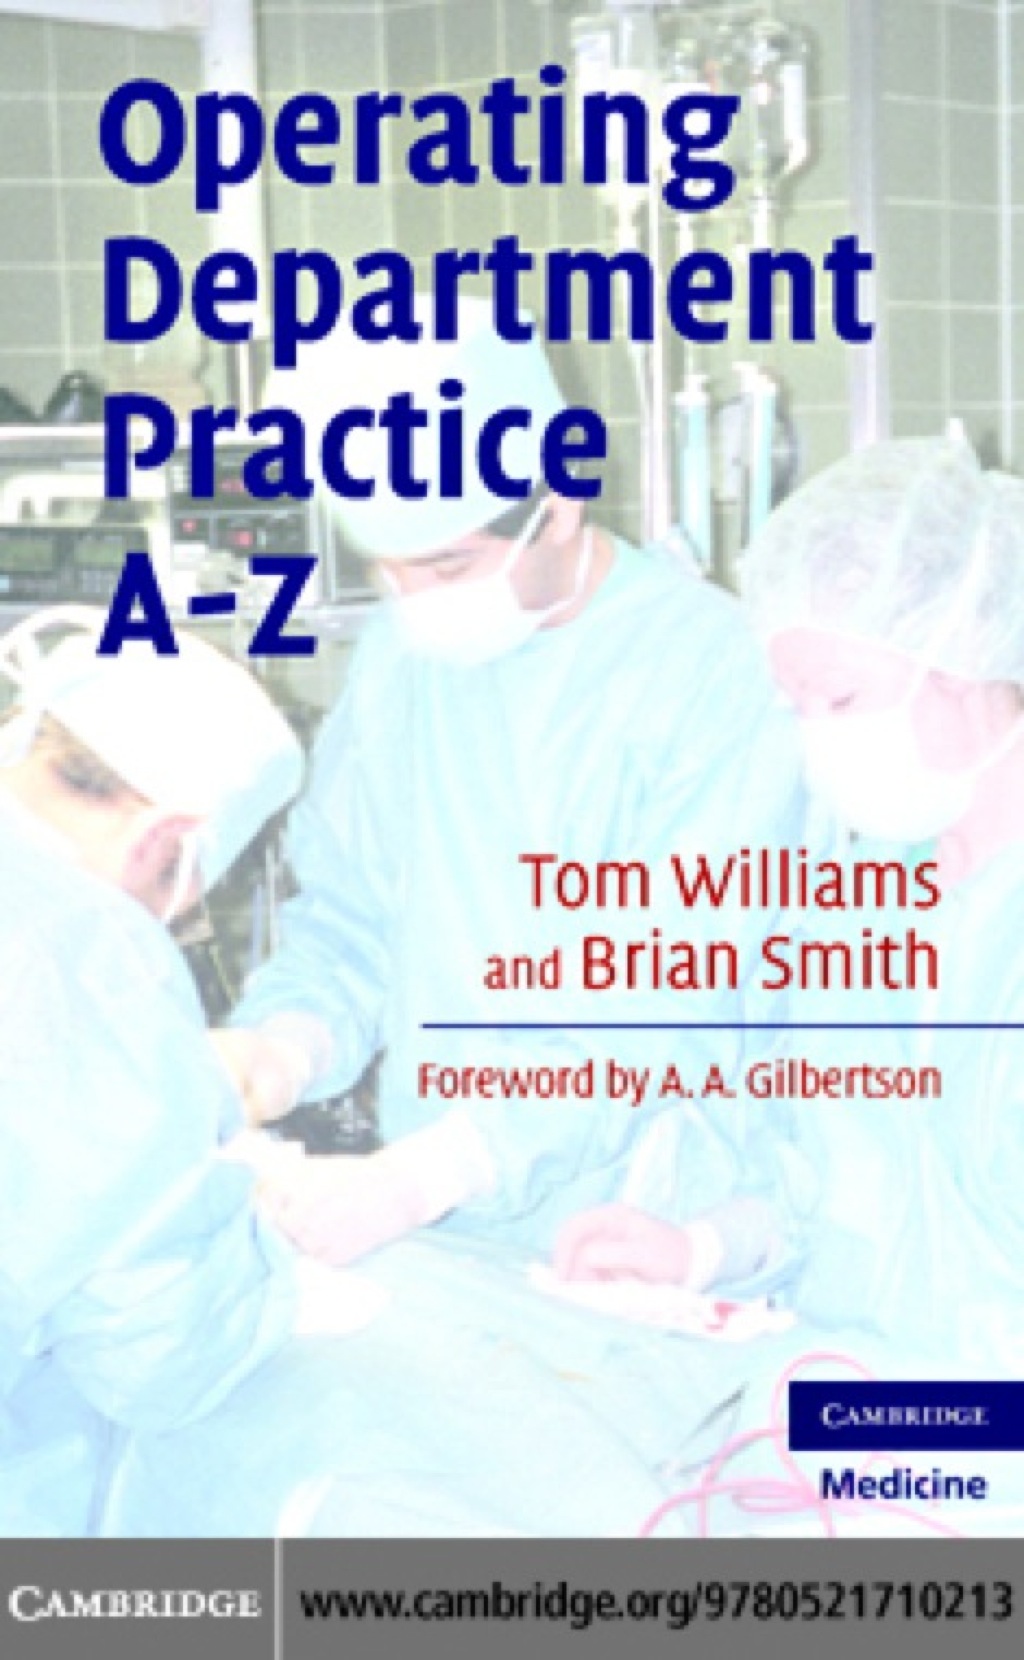 Operating Department Practice A-Z (eBook) - Tom Williams; Brian Smith